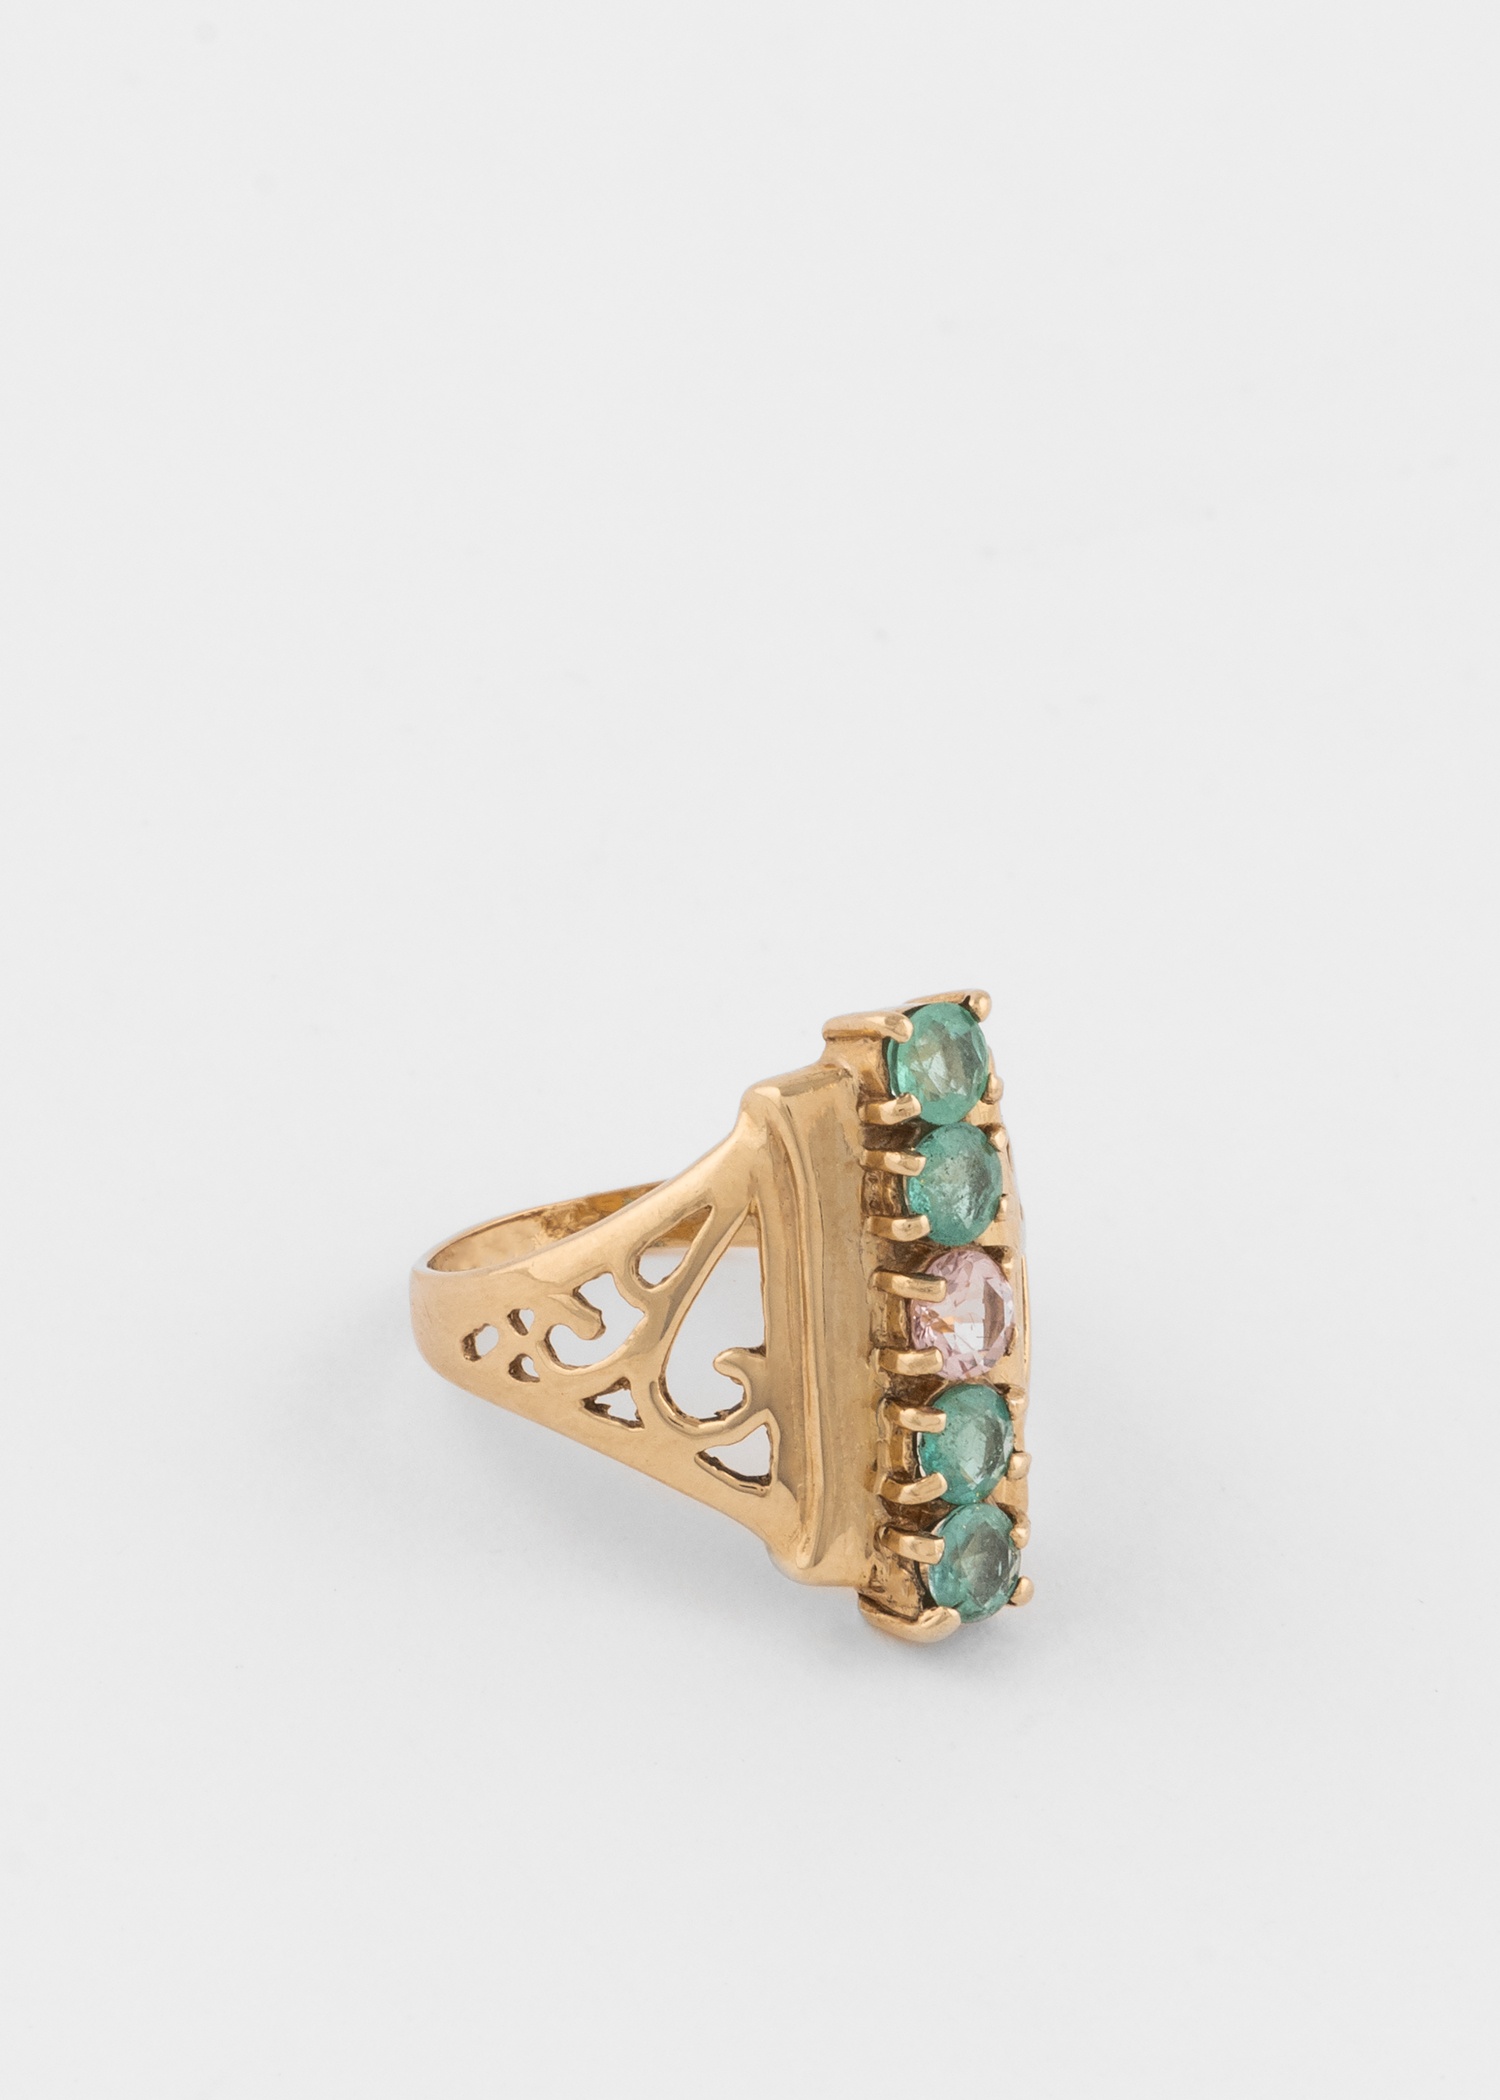 'Extravagant Emerald and Morganite' Gold Cocktail Ring by Barqoue Rocks - 2